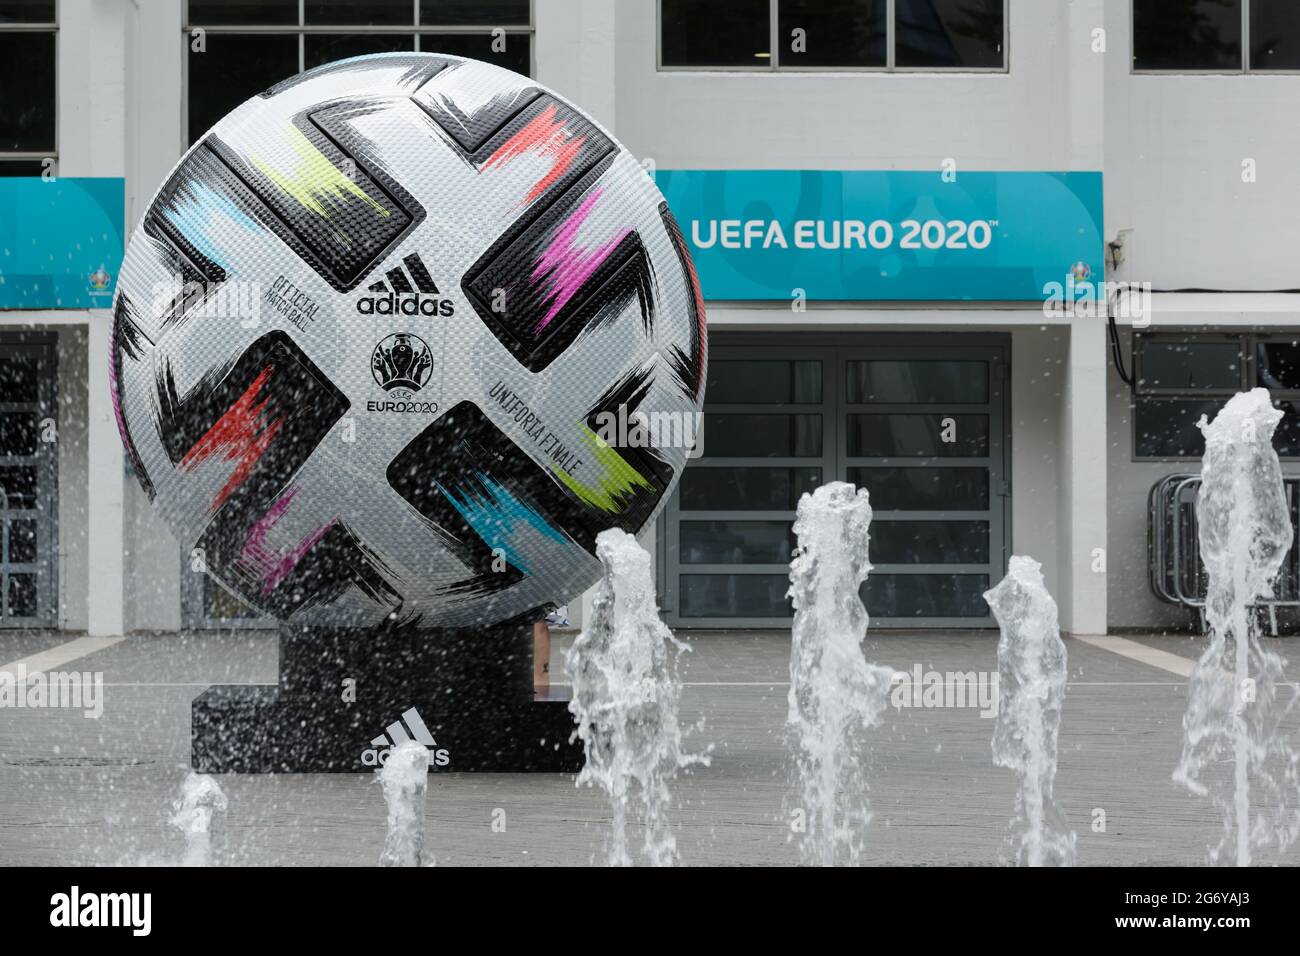 Wembley Stadium, Wembley Park, UK. 9th July 2021.   A giant replica Adidas 'UNIFORIA FINALE' football - the official match ball for the finals - is on display in Arena Square.  60,000 fans are set to descend to Wembley Park to watch England play Italy in the UEFA EURO 2020 Finals at Wembley Stadium on Sunday 11th July.  Amanda Rose/Alamy Live News  Amanda Rose/Alamy Live News  Amanda Rose/Alamy Live News Stock Photo